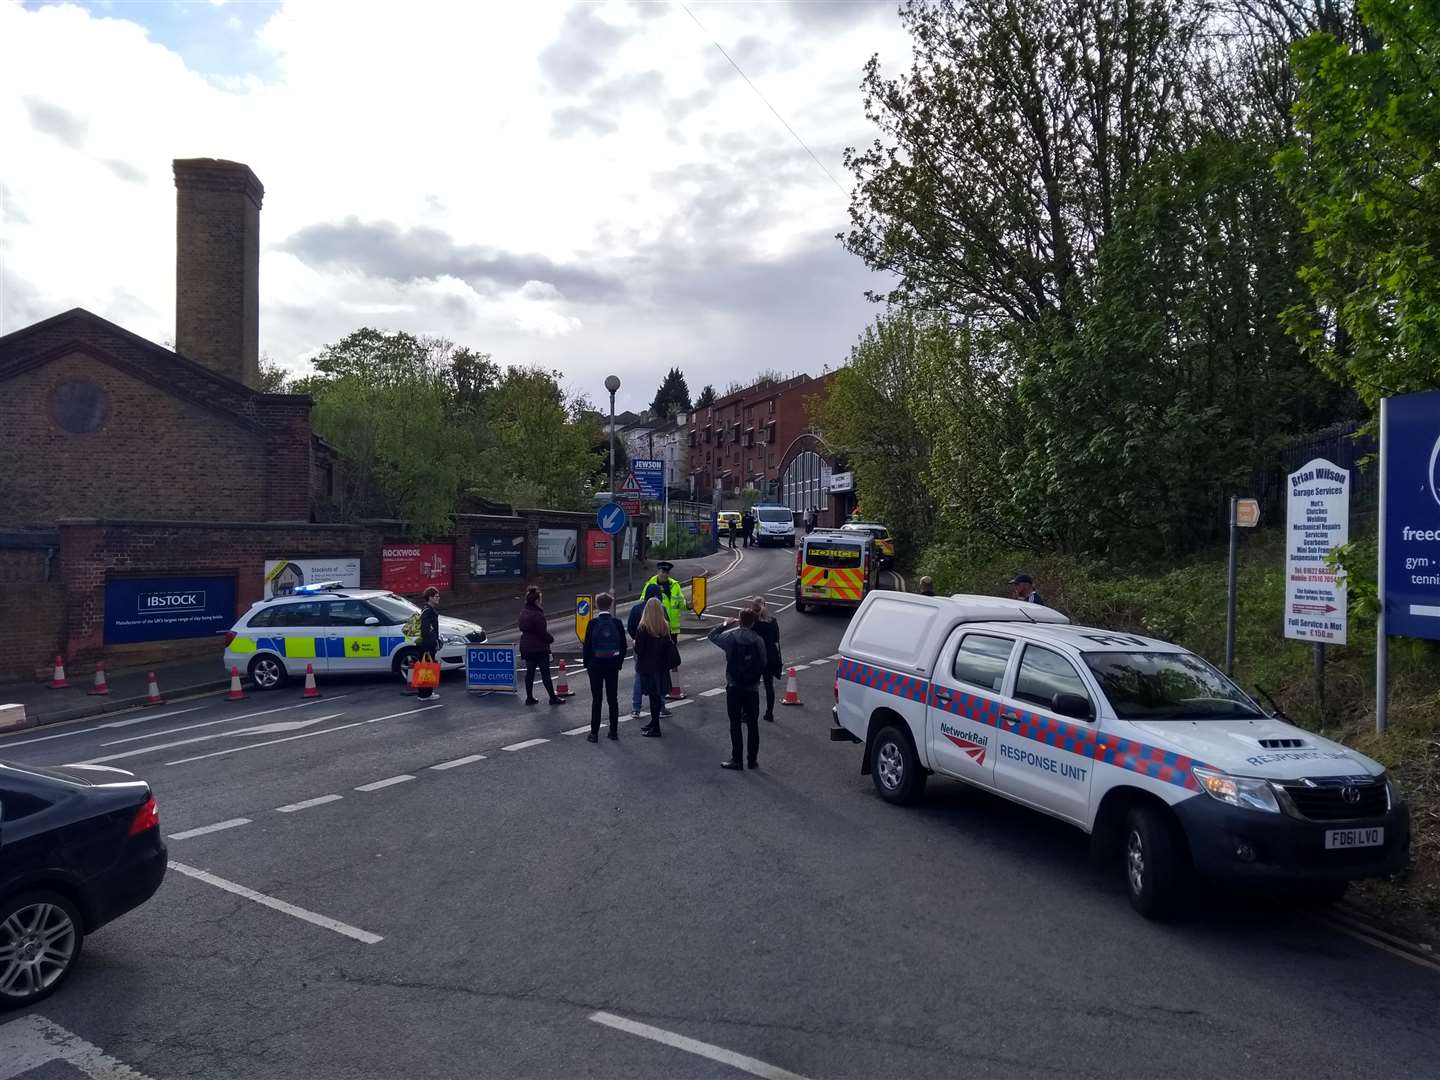 Police at the scene of an 'incident' near Maidstone Barracks station. (1638814)